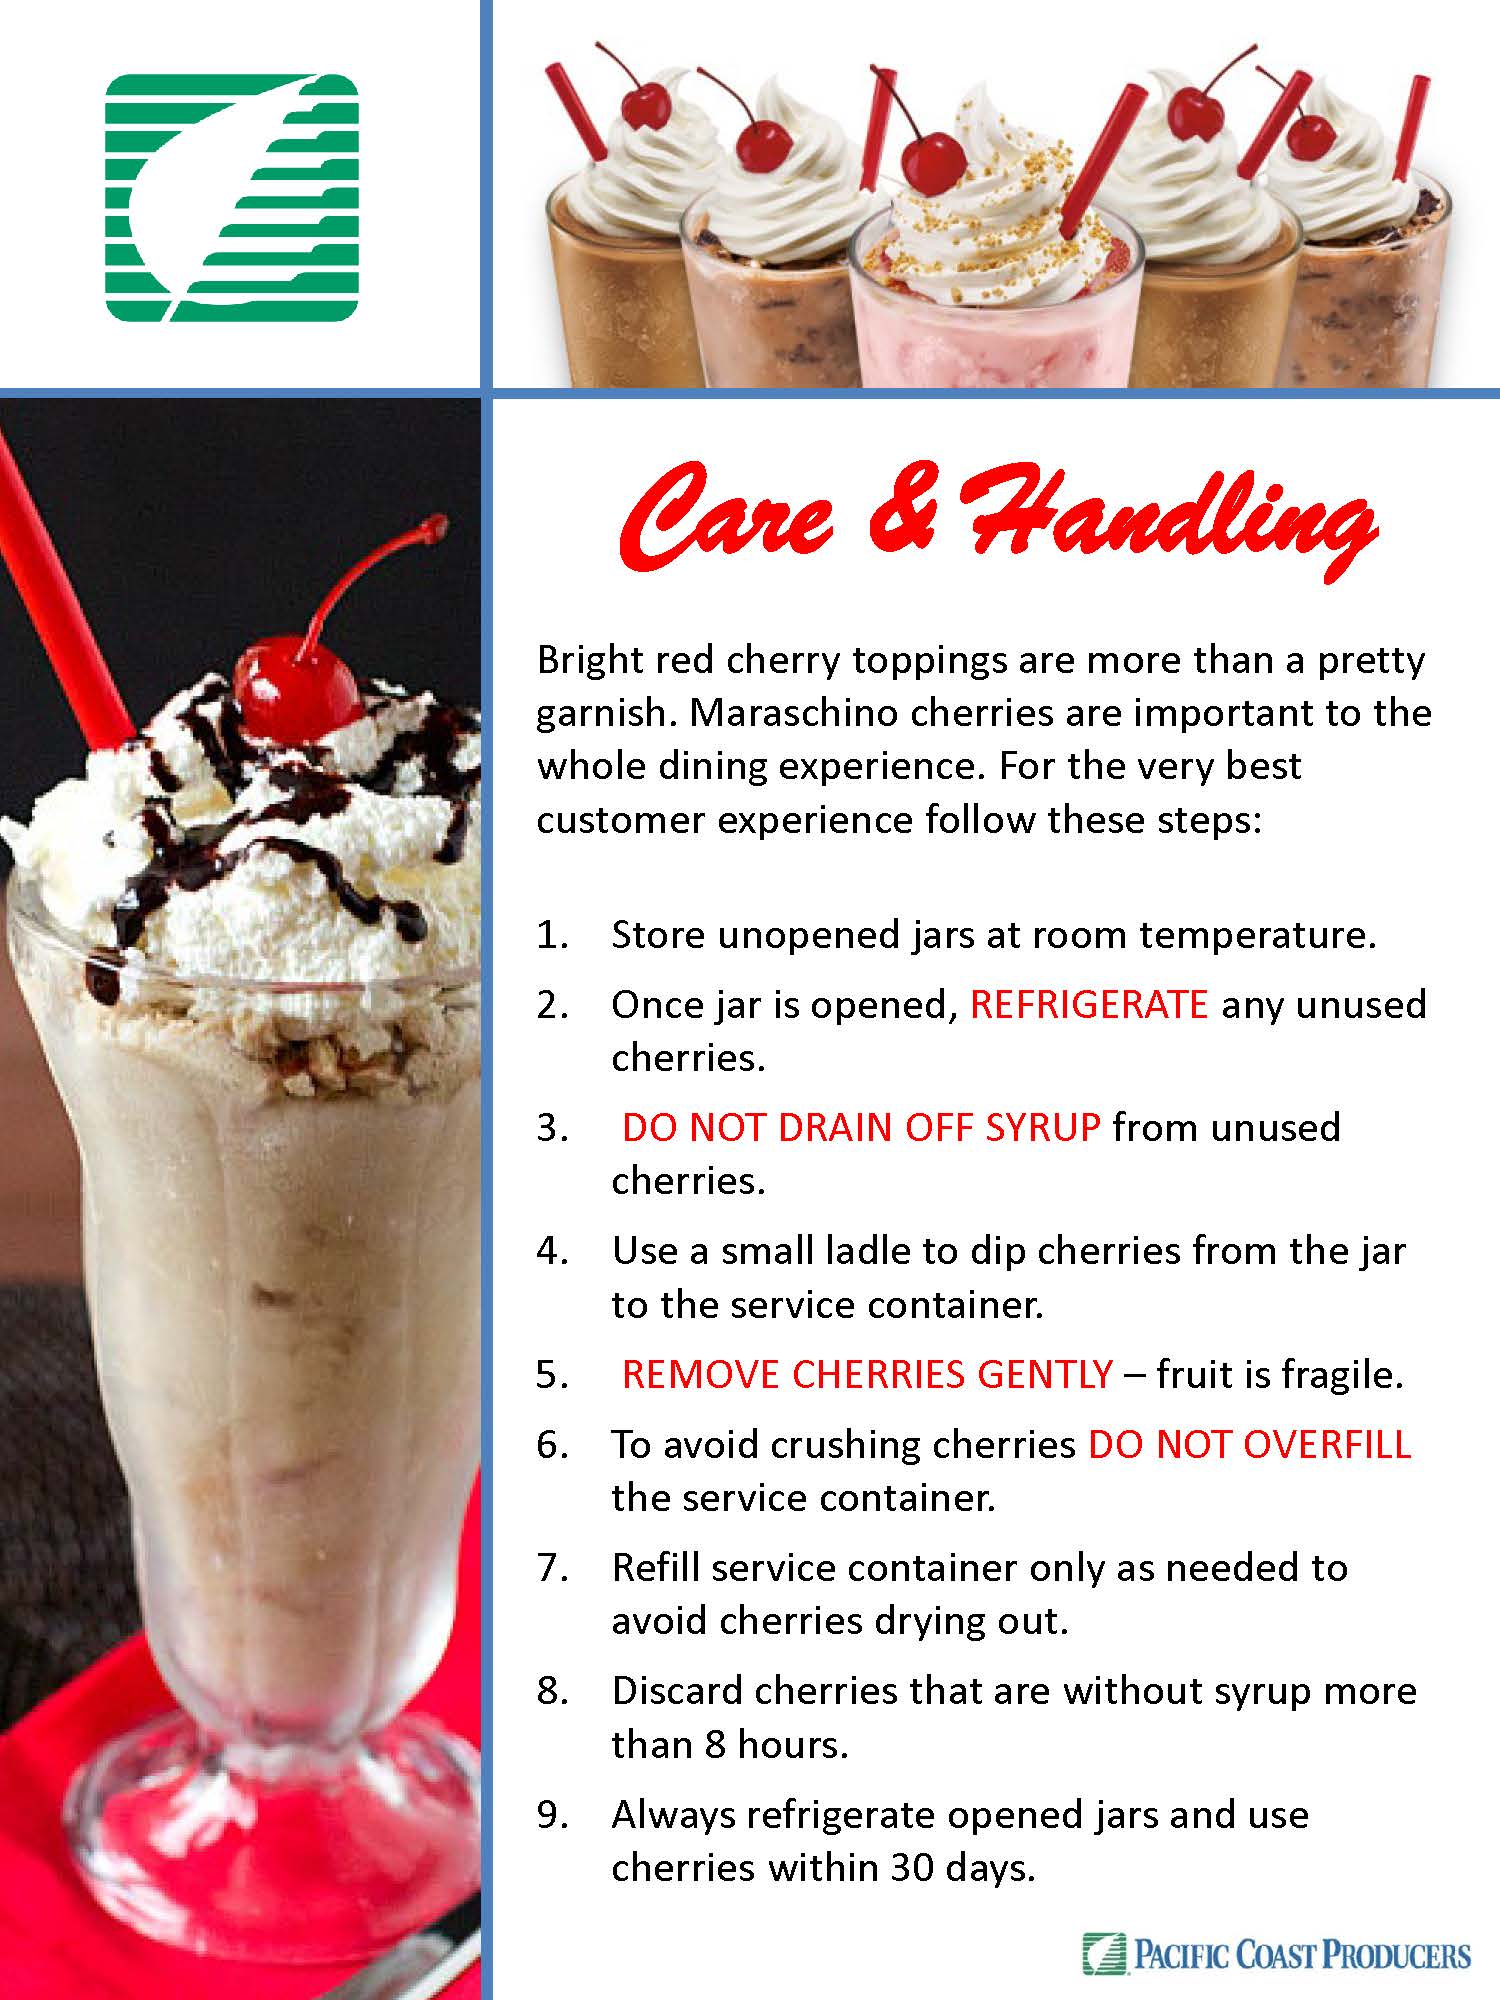 A poster providing instructions for creating a sundae, emphasizing care and handling of maraschino cherries.